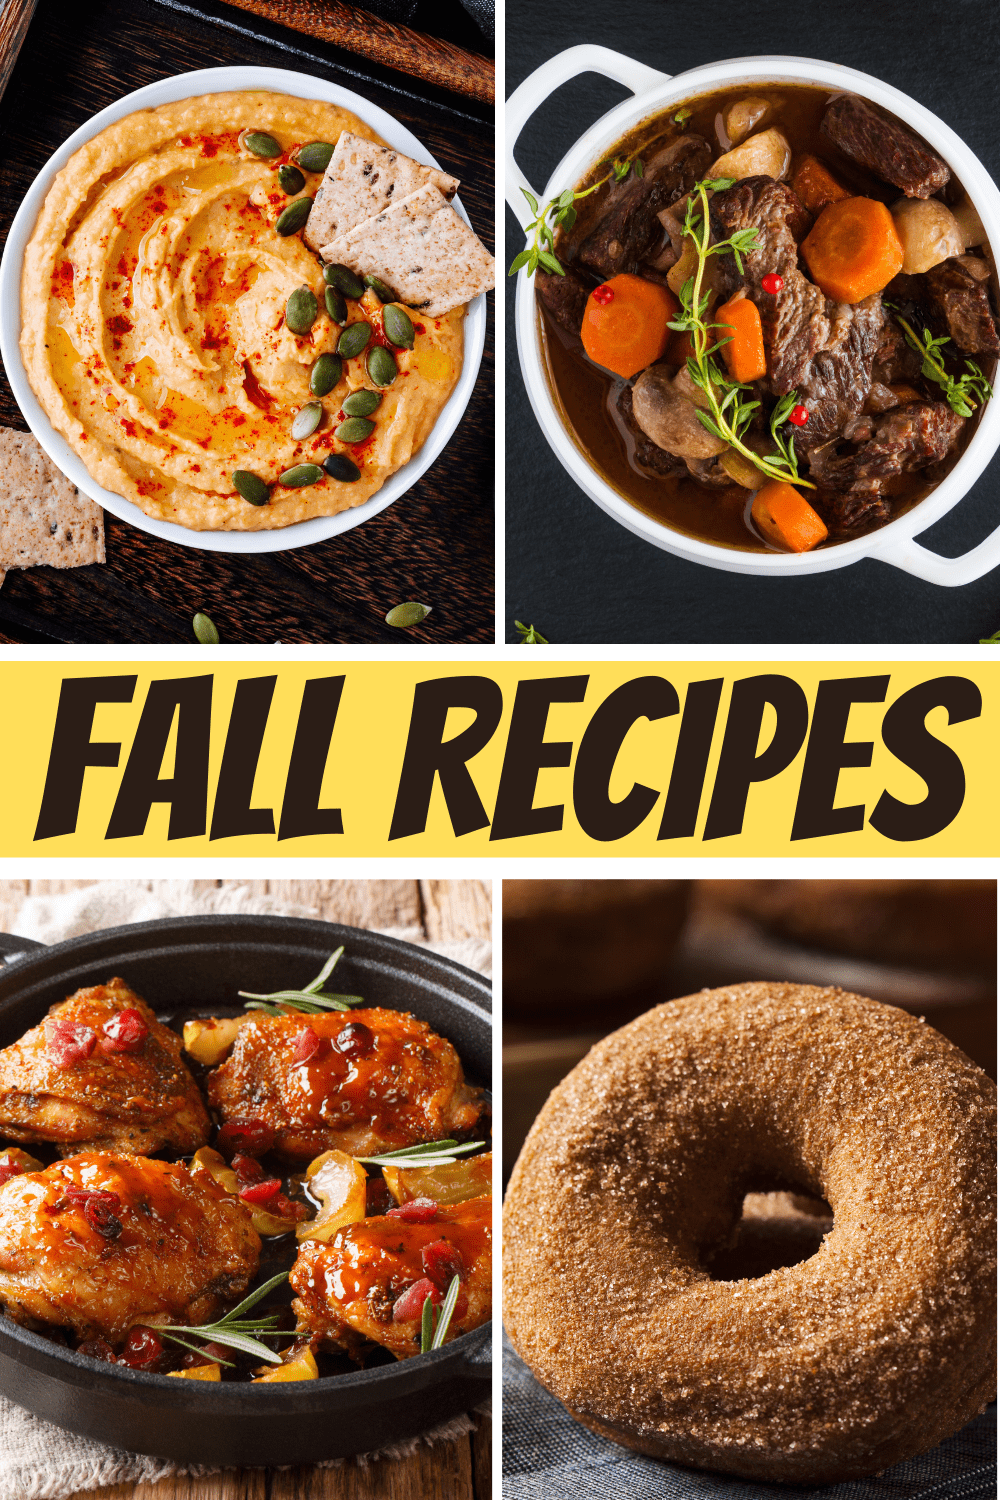 24 Popular Fall Recipes from Dinner to Dessert - Insanely Good